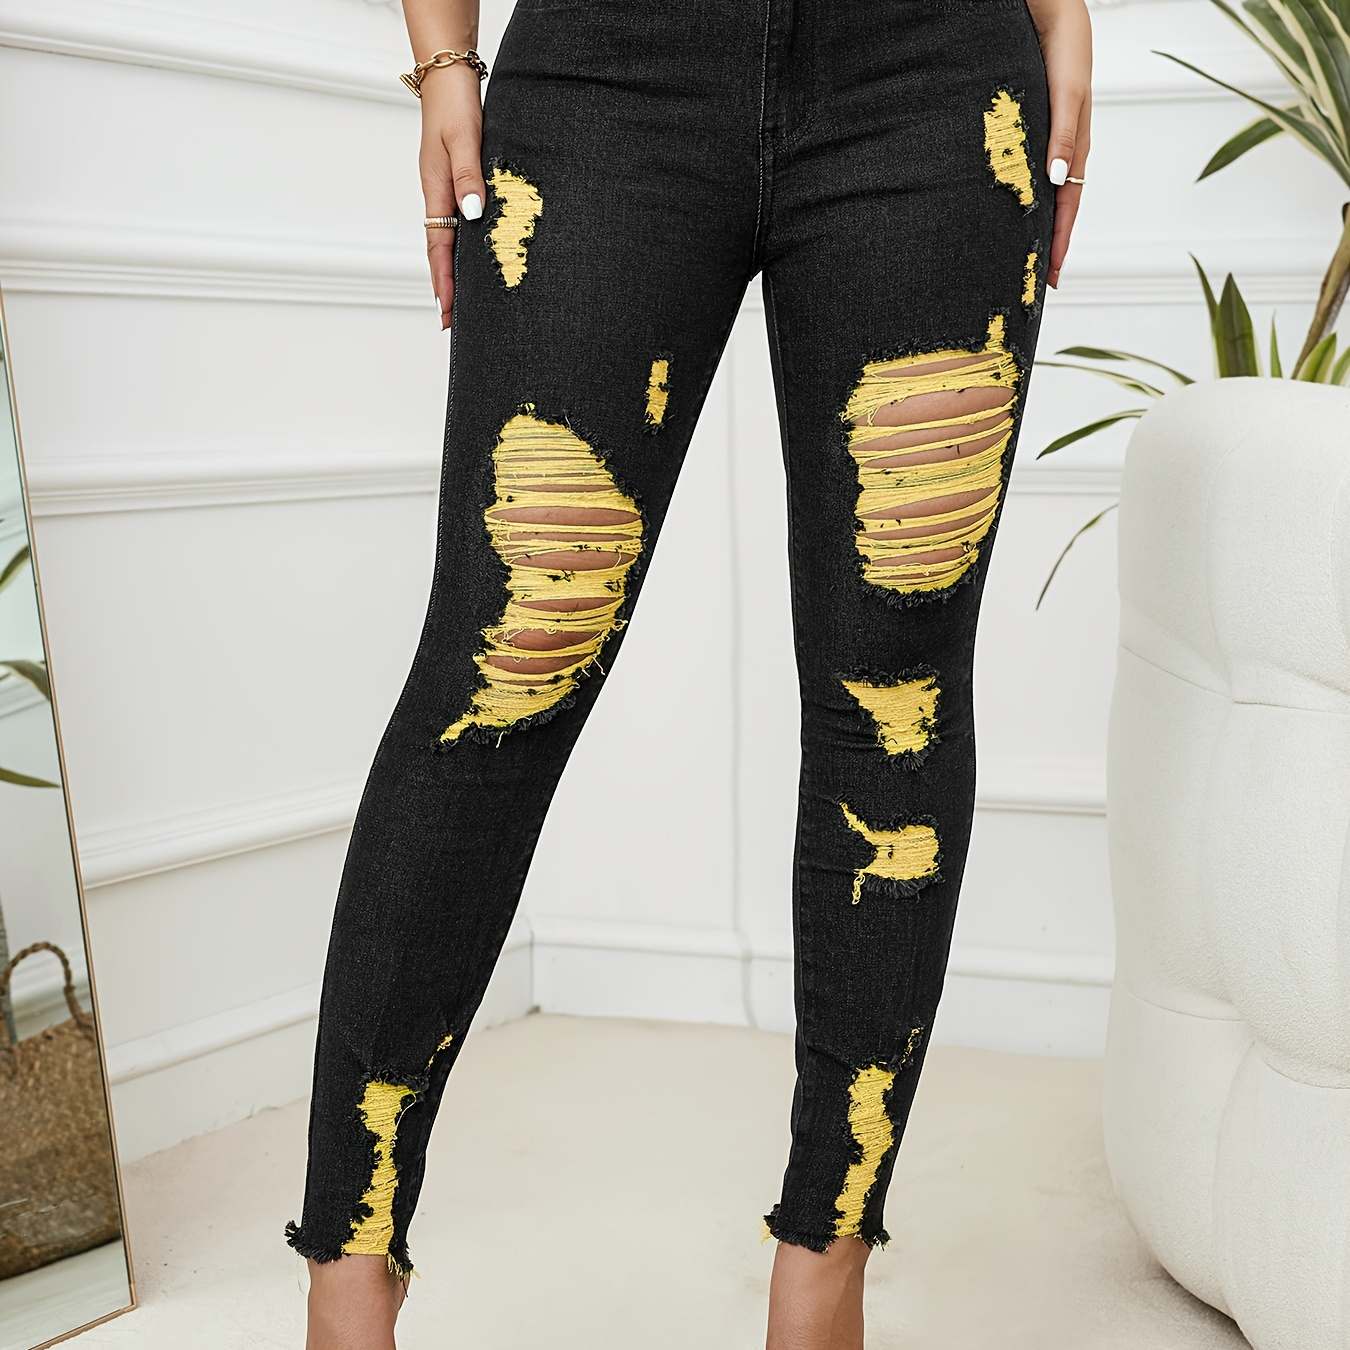 

Women's Fashion Distressed Jeans, Mid-waist Stretch Denim, Casual Ripped Long Pants With Frayed Hem, Washed Effect, Black With Yellow Detail